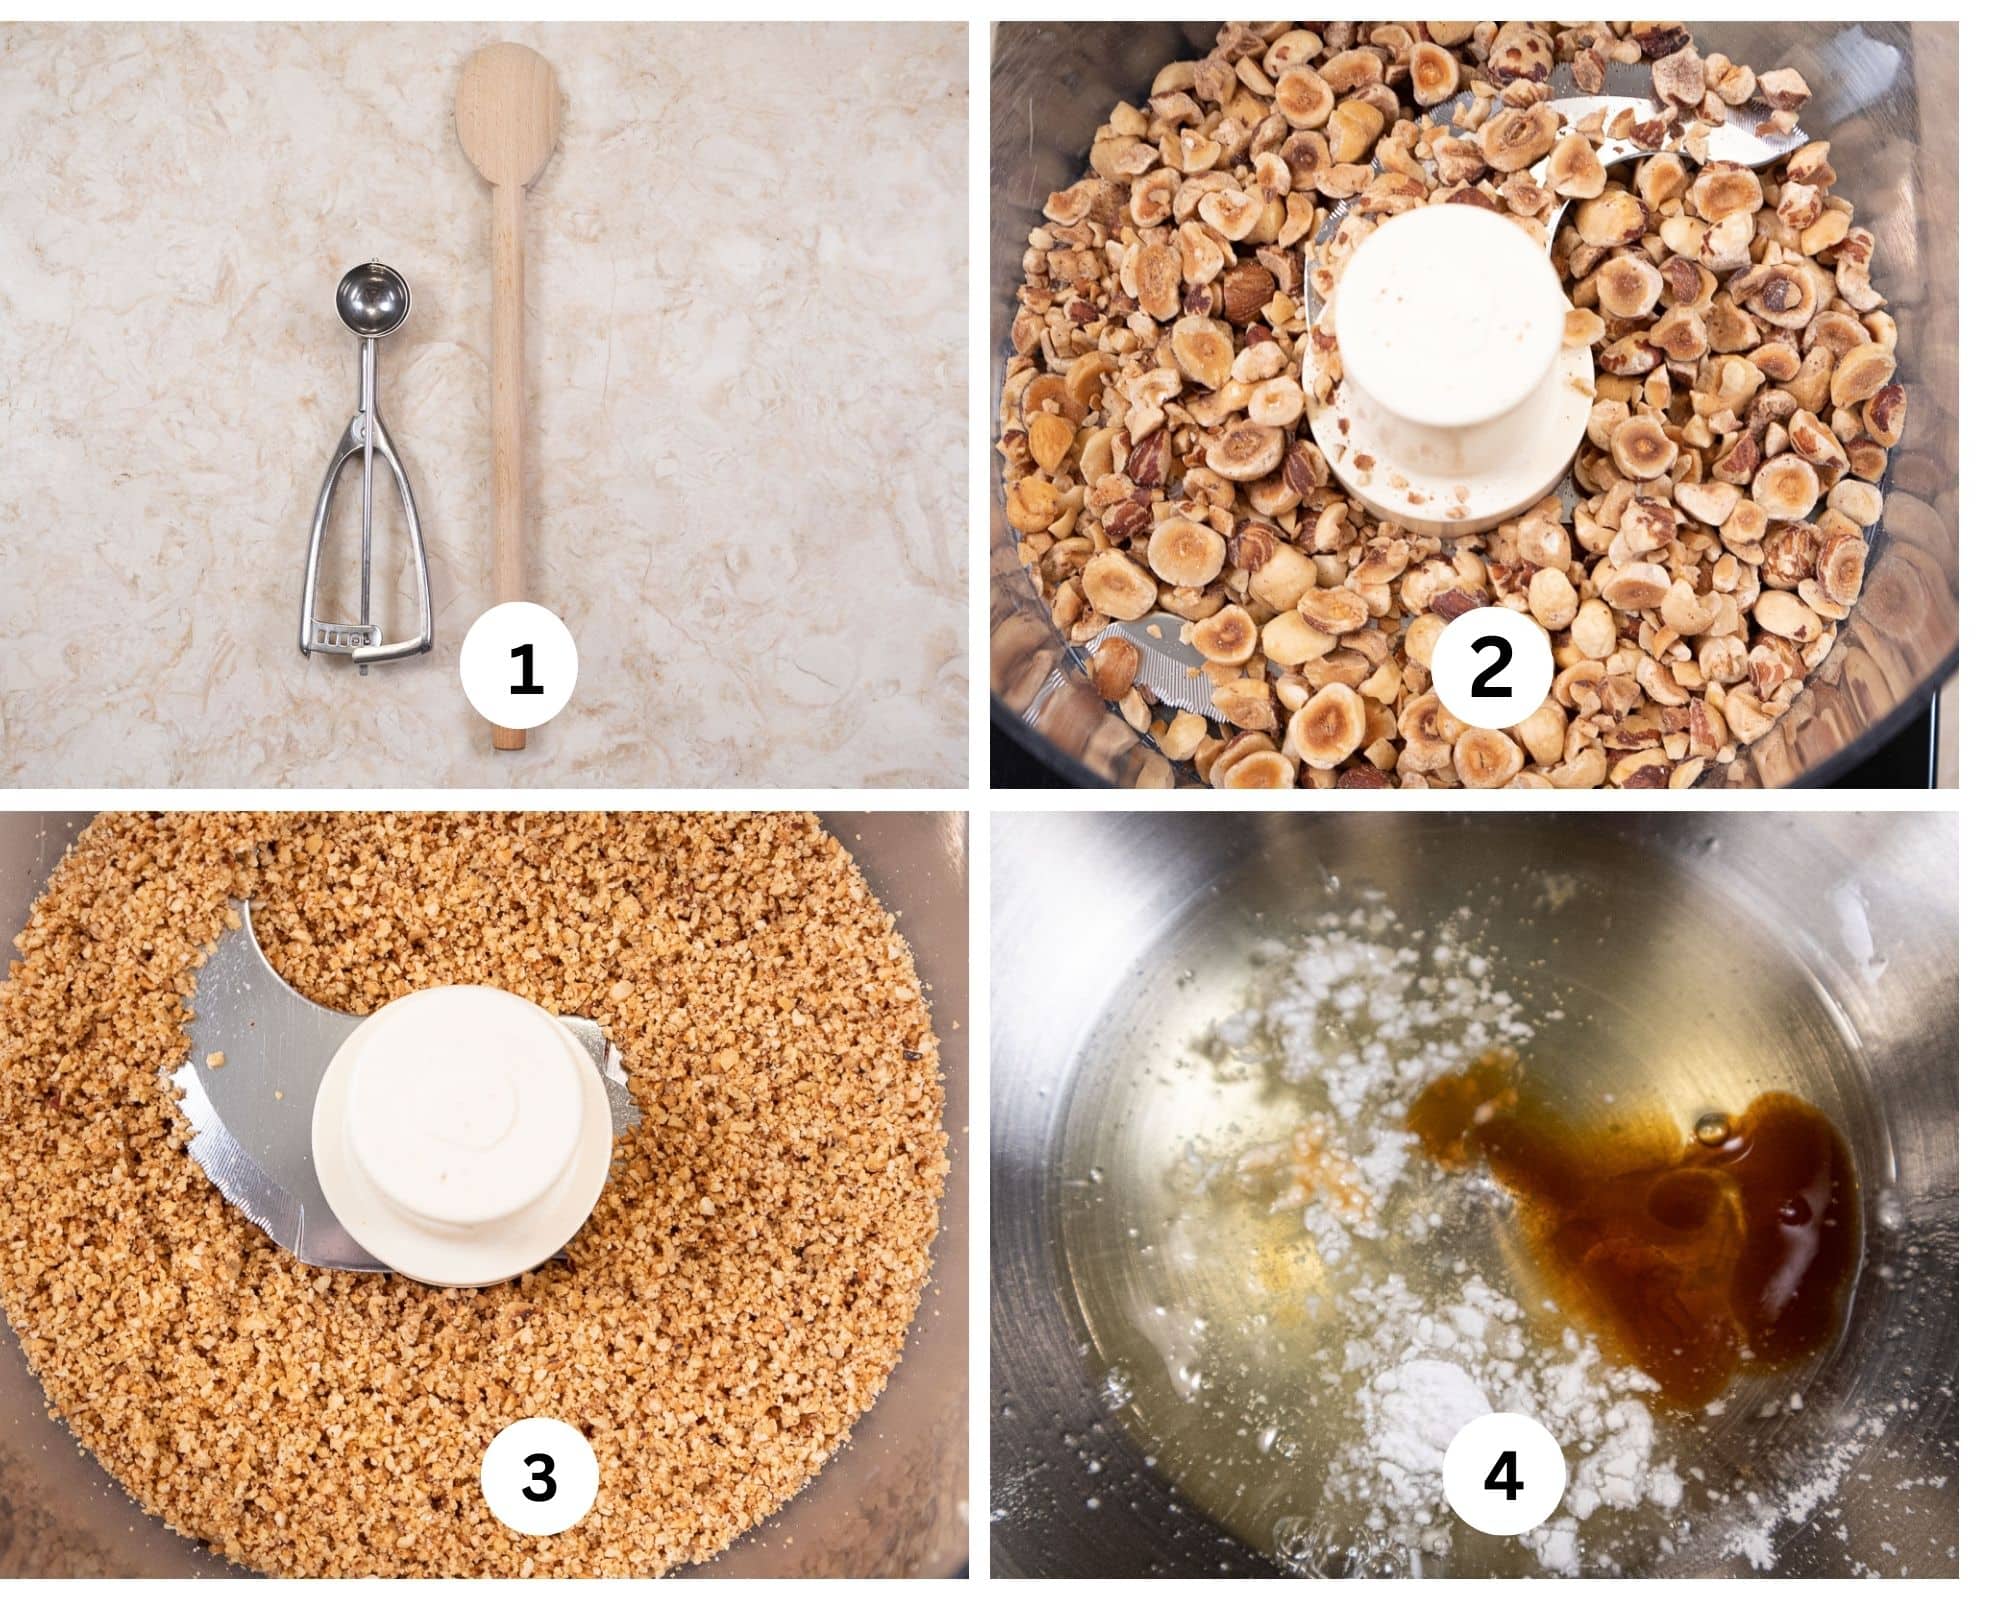 The first collage shows the disher and a wooden spoon, the hazelnuts in the processor, then ground, and the egg whites, cream of tarter and vanilla in a mixing bowl.